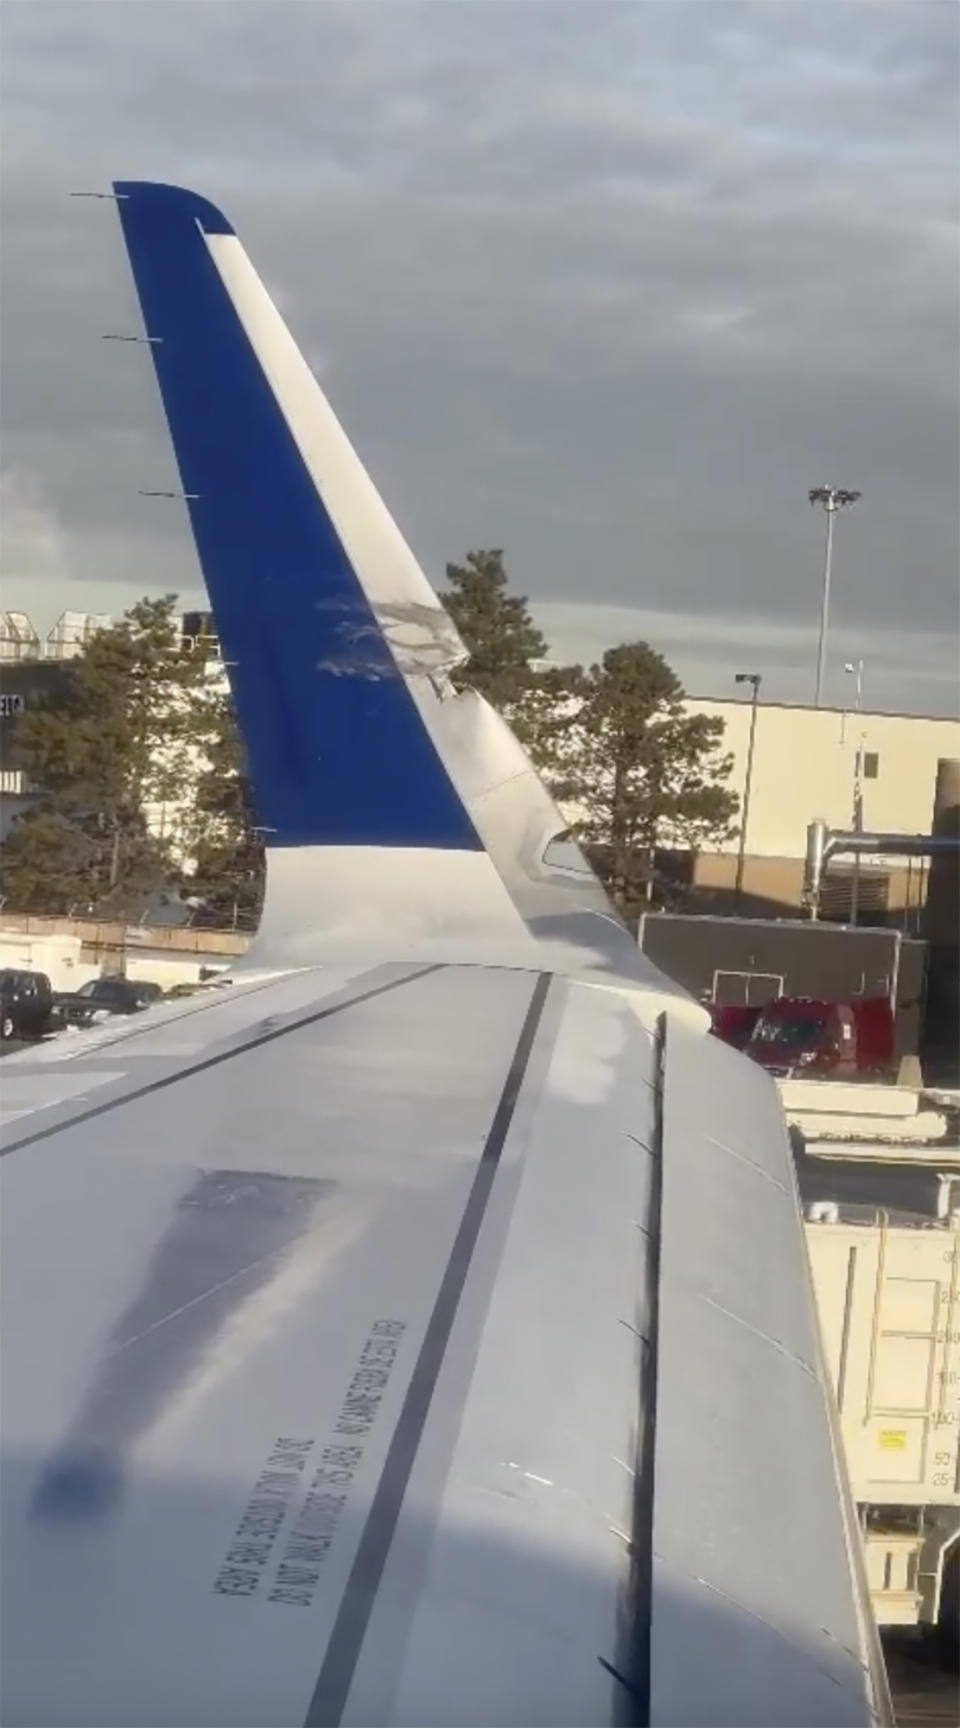 This image provided by Brian O'Neil shows a damaged plane's wingtip after two JetBlue planes made contact in a minor collision at Boston Logan International Airport on Thursday, Feb. 8, 2024 in Boston. An airport authority spokeswoman says one plane's wingtip touched another plane’s tail while both Airbus 321 jets were in the de-icing area. (Brian O'Neil via AP) I have received permission for the following footage of the plane collision at Boston Logan International Airport between two Jet Blue planes 2/8. Credit: